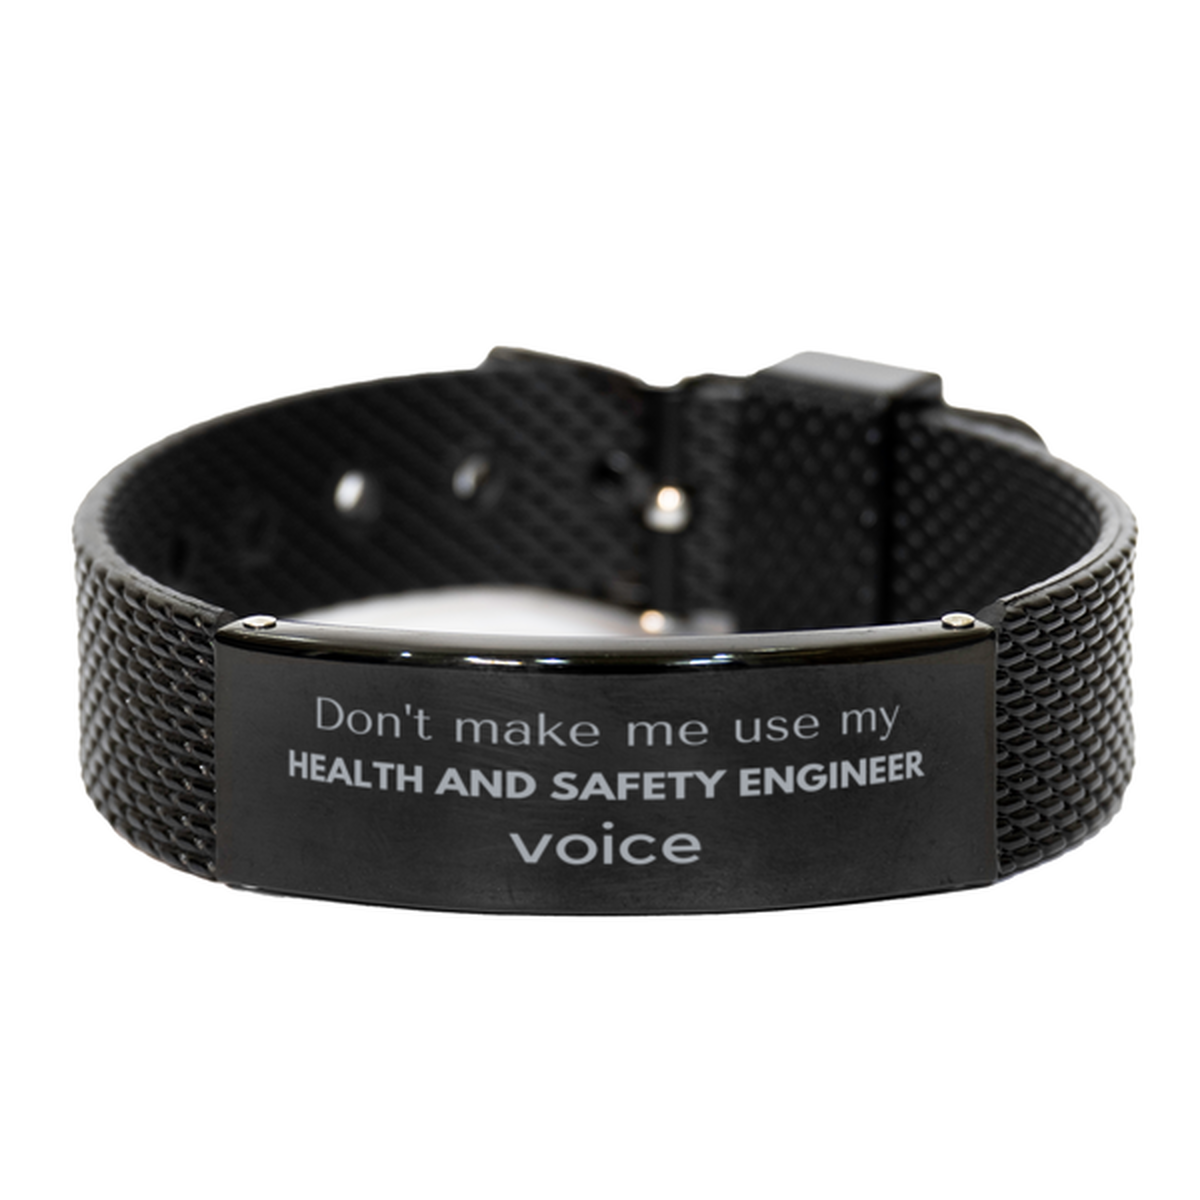 Don't make me use my Health and Safety Engineer voice, Sarcasm Health and Safety Engineer Gifts, Christmas Health and Safety Engineer Black Shark Mesh Bracelet Birthday Unique Gifts For Health and Safety Engineer Coworkers, Men, Women, Colleague, Friends